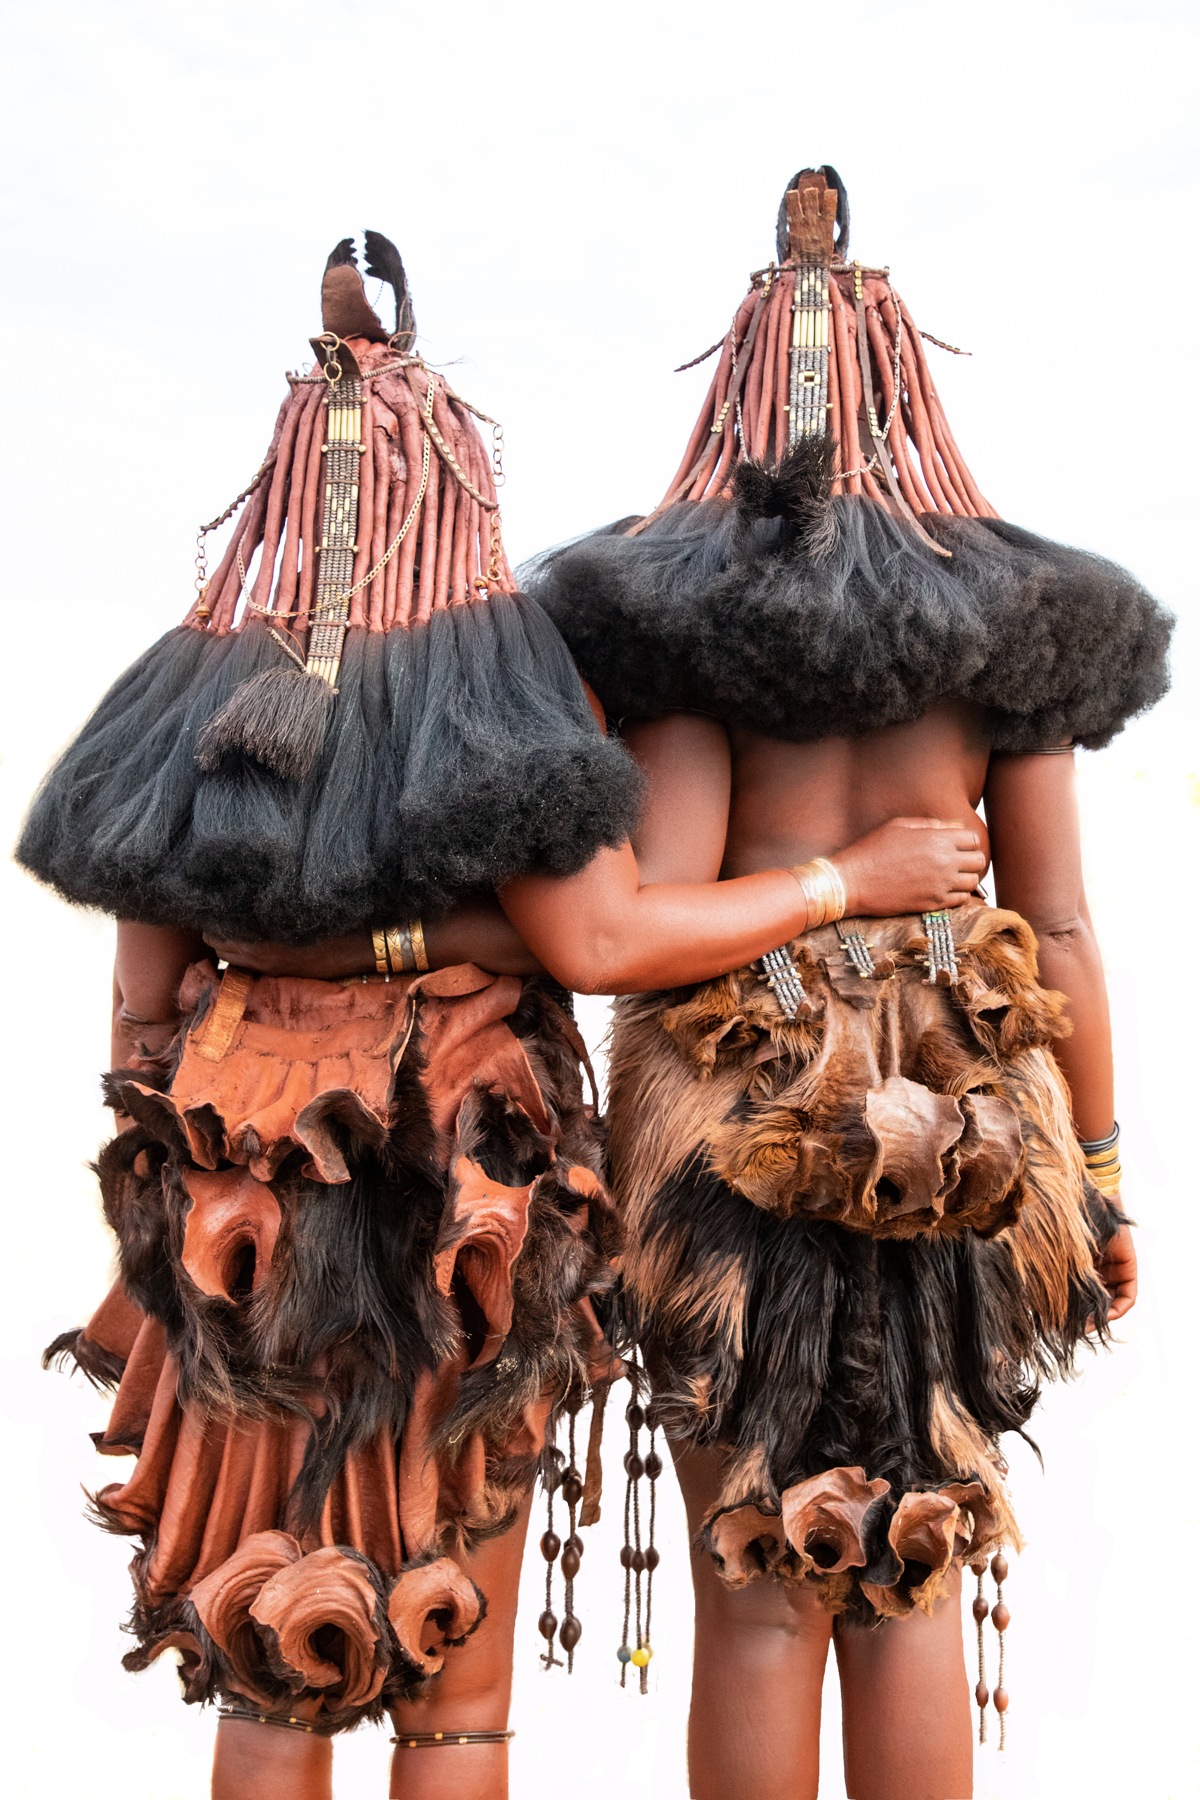 Meet Namibia's beautiful Himba people on our photography tour